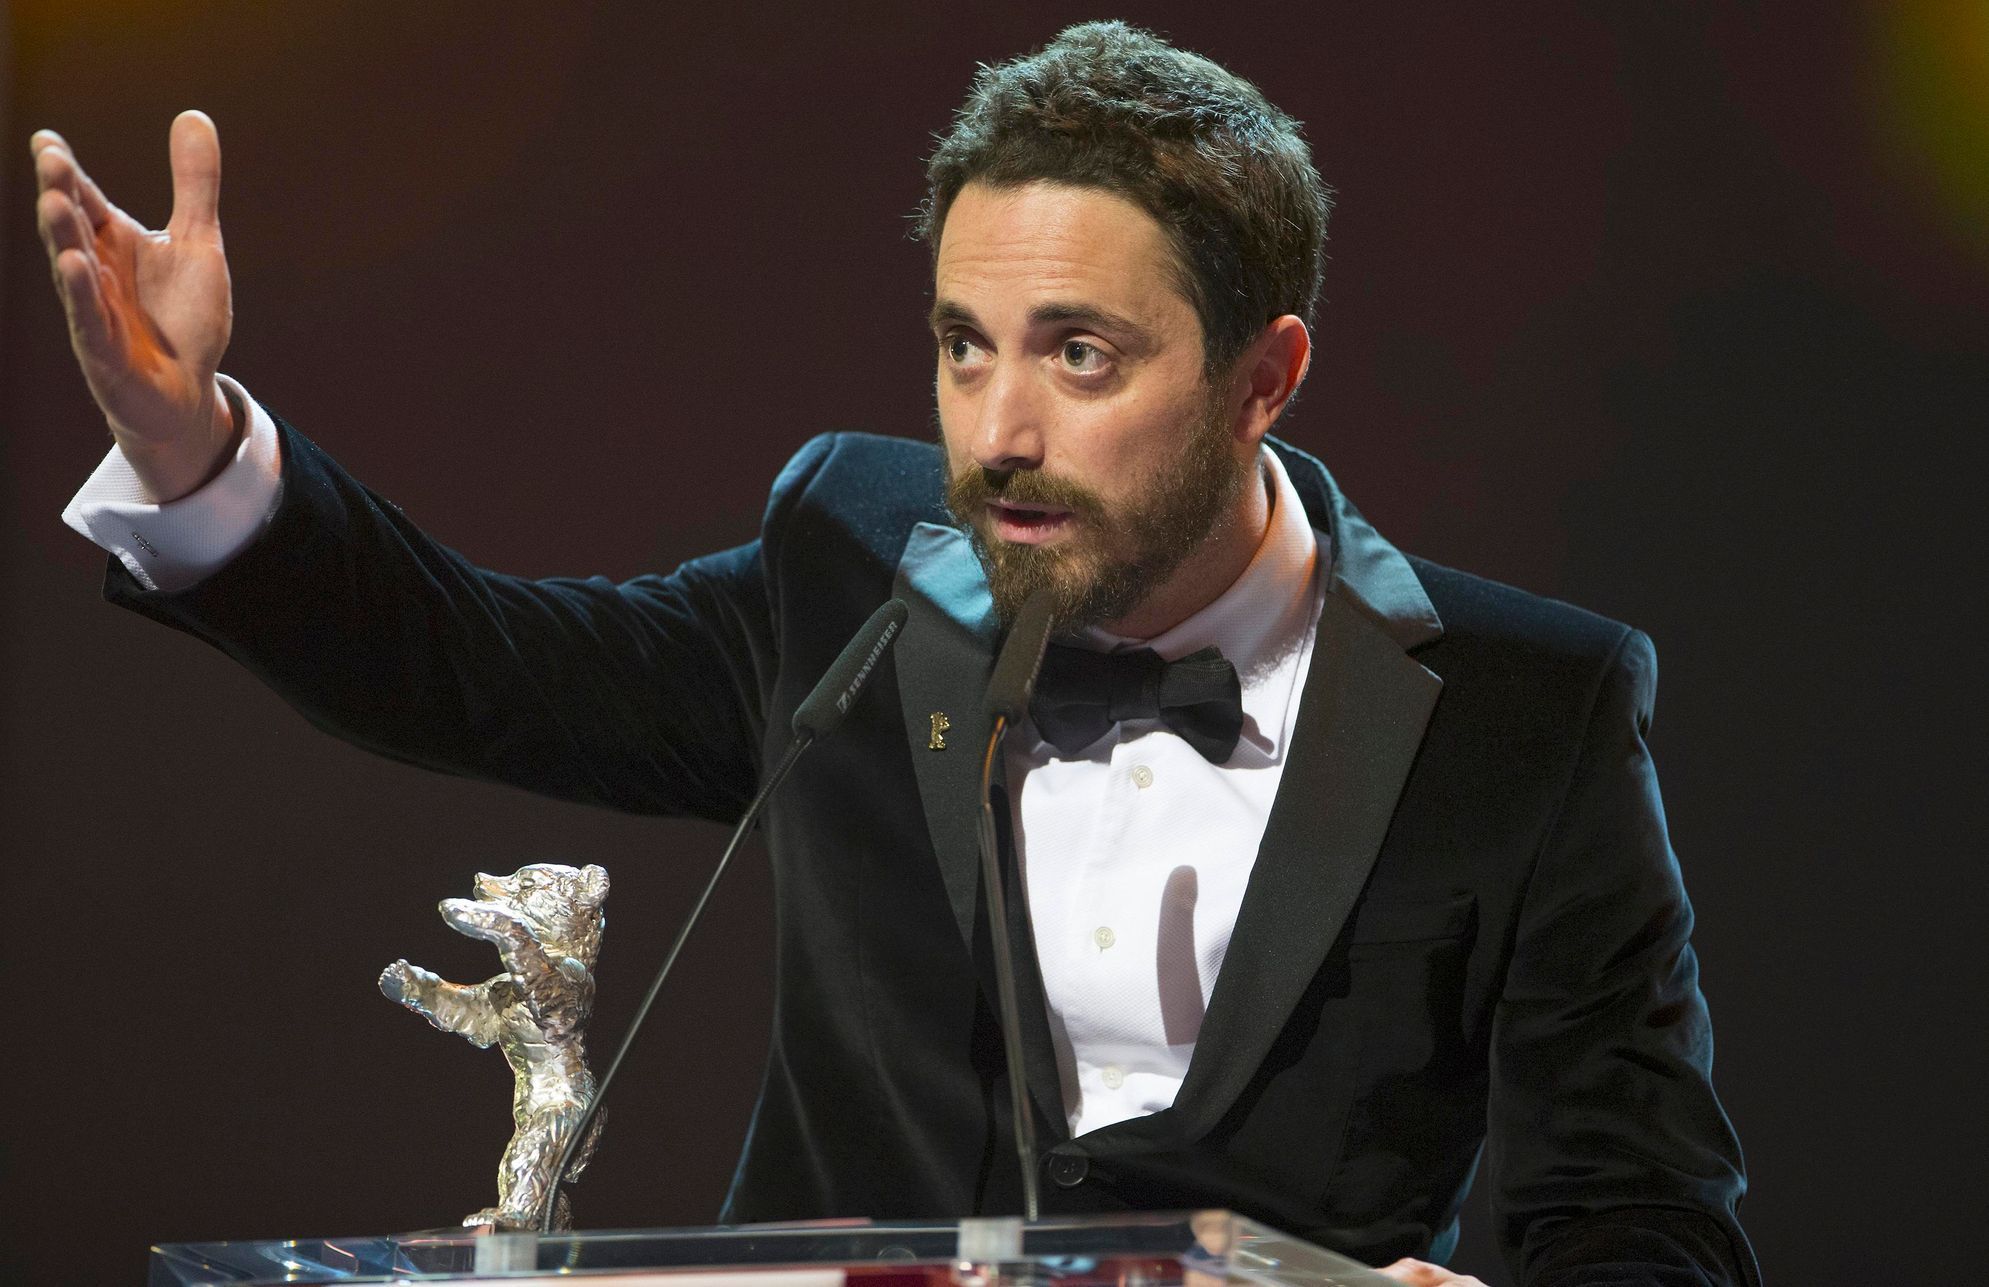 Larrain gestures after receiving the Silver Bear Grand Jury Prize for the film 'El Club' at the awards ceremony of the 65th Berlinale International Film Festival in Berlin